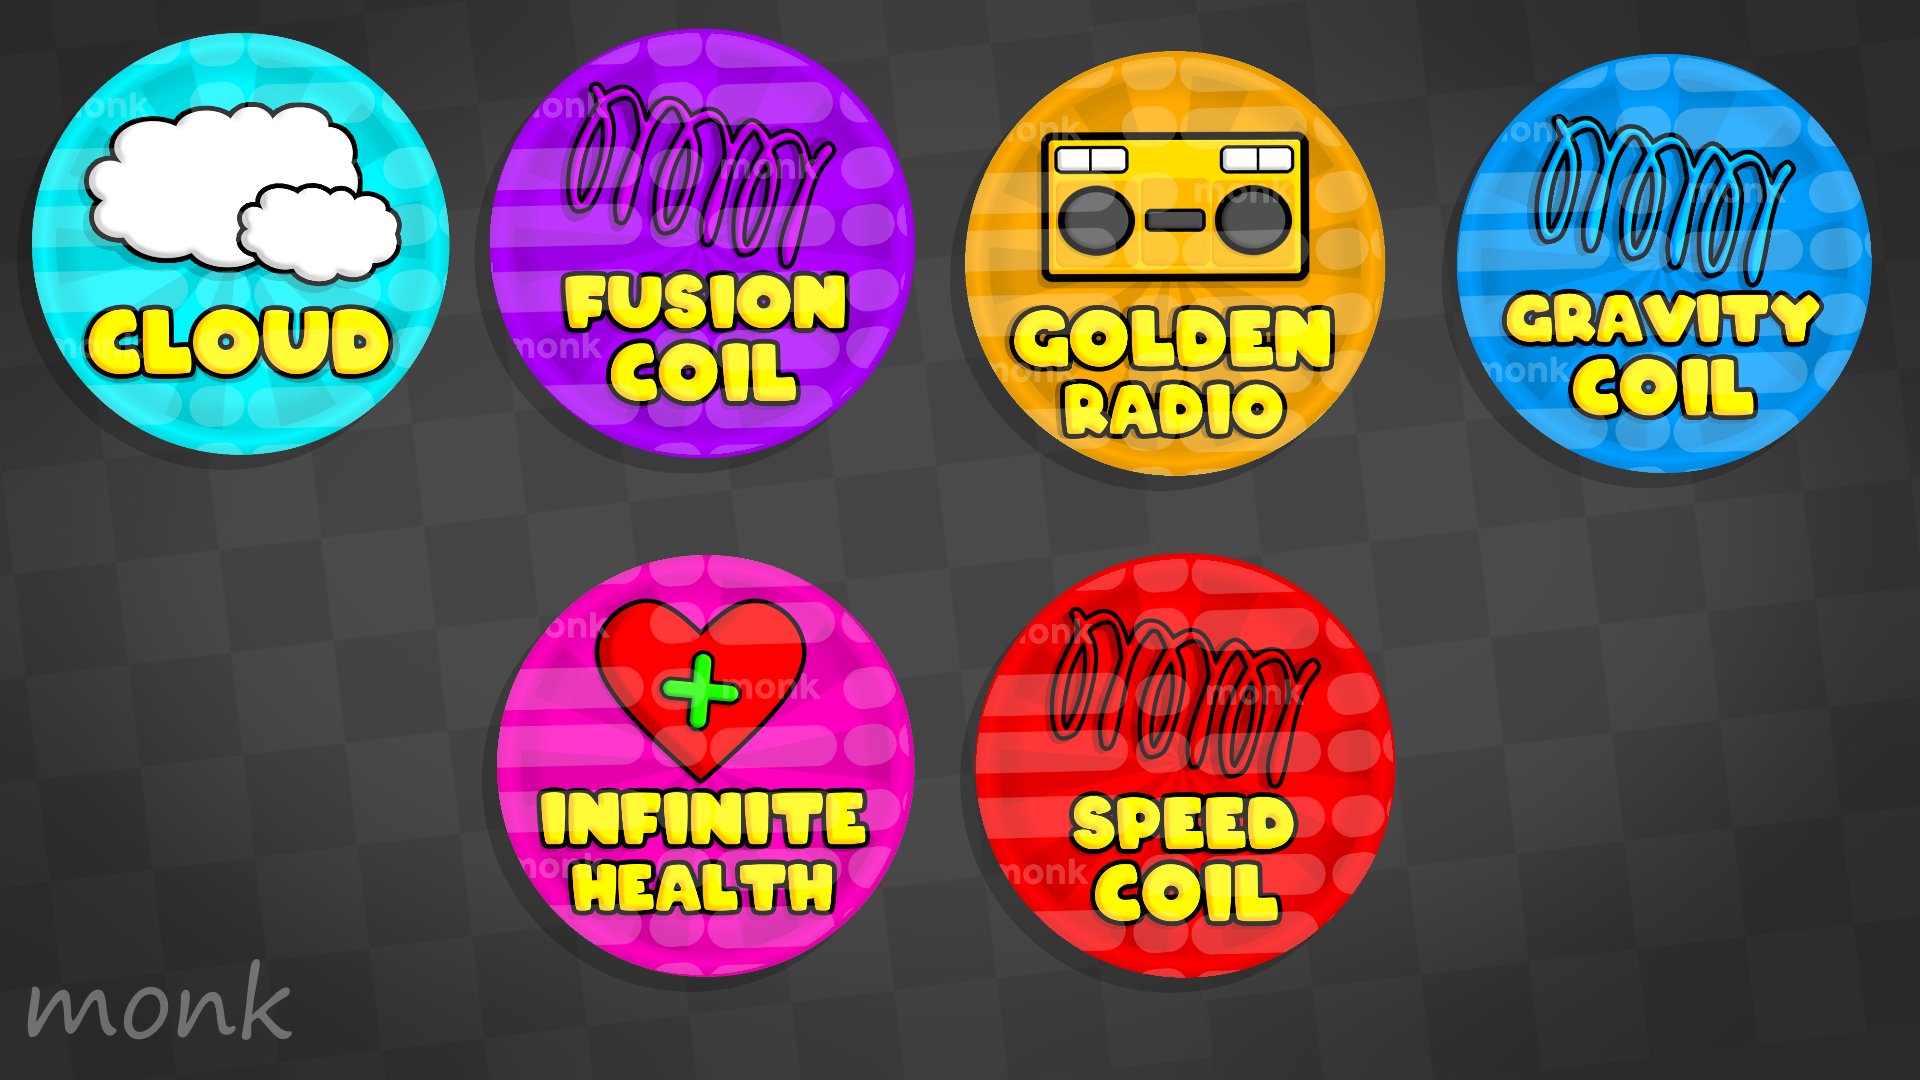 Monk On Twitter 6 Gamepass Icons For Noahg59 3330 On Discord I Accept Usd Aswell Price 300 R Each Icon 50 Robux 0 25 Thank You For Ordering Roblox Robloxdev Robloxgfx Robloxart Https T Co U2mf5lw3j7 - roblox gravity coil gamepass